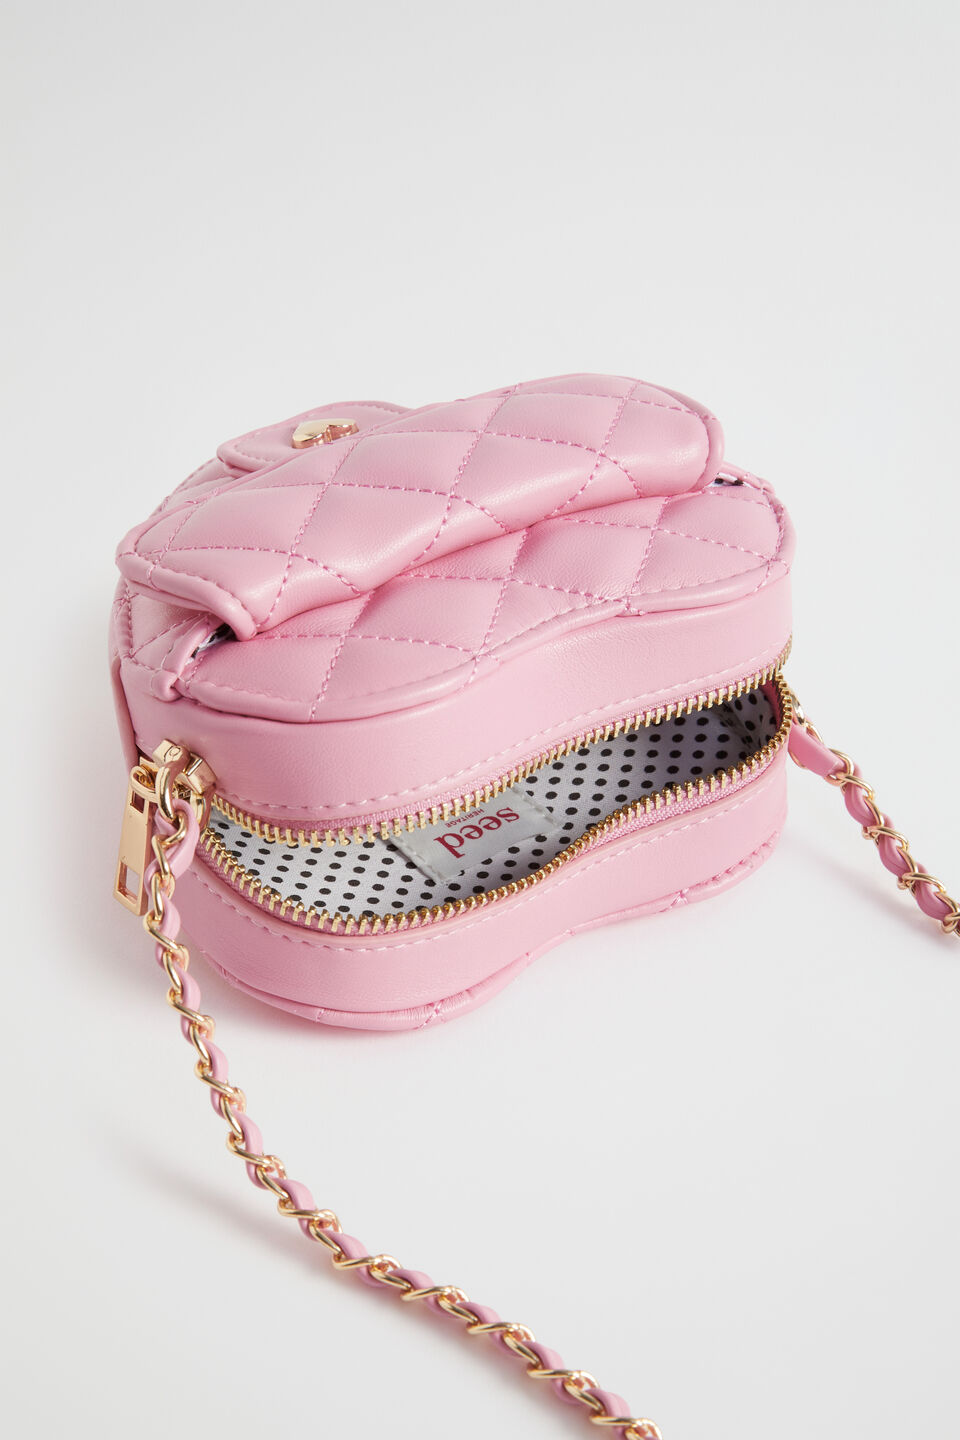 Quilted Heart Cross Body Bag  Candy Pink